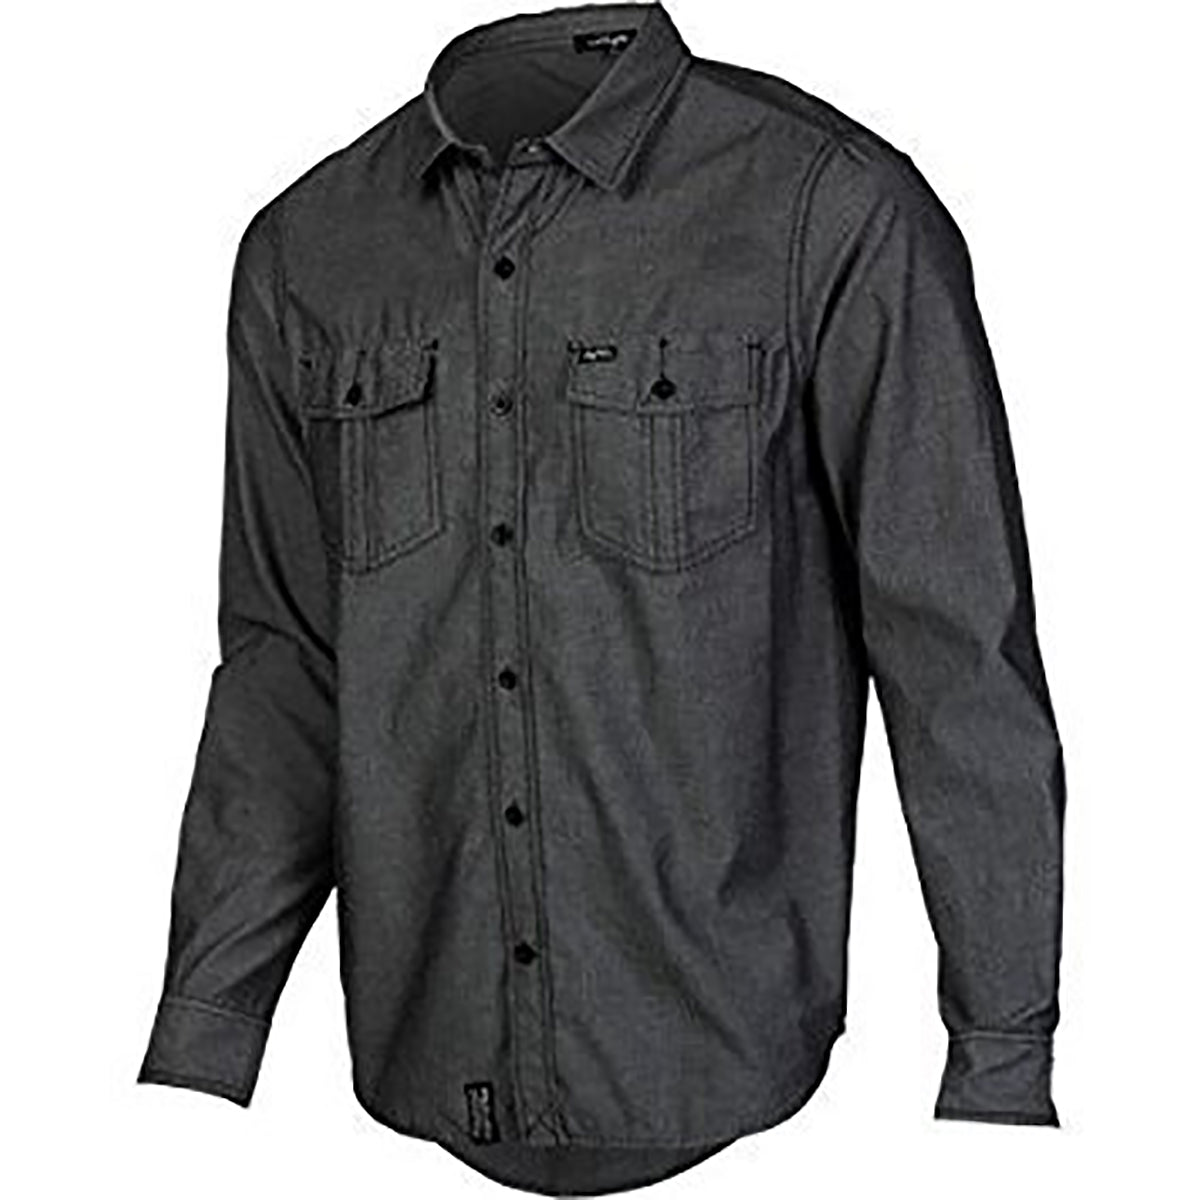 LRG Stay Peaking Woven Men's Long-Sleeve Shirts-L122008